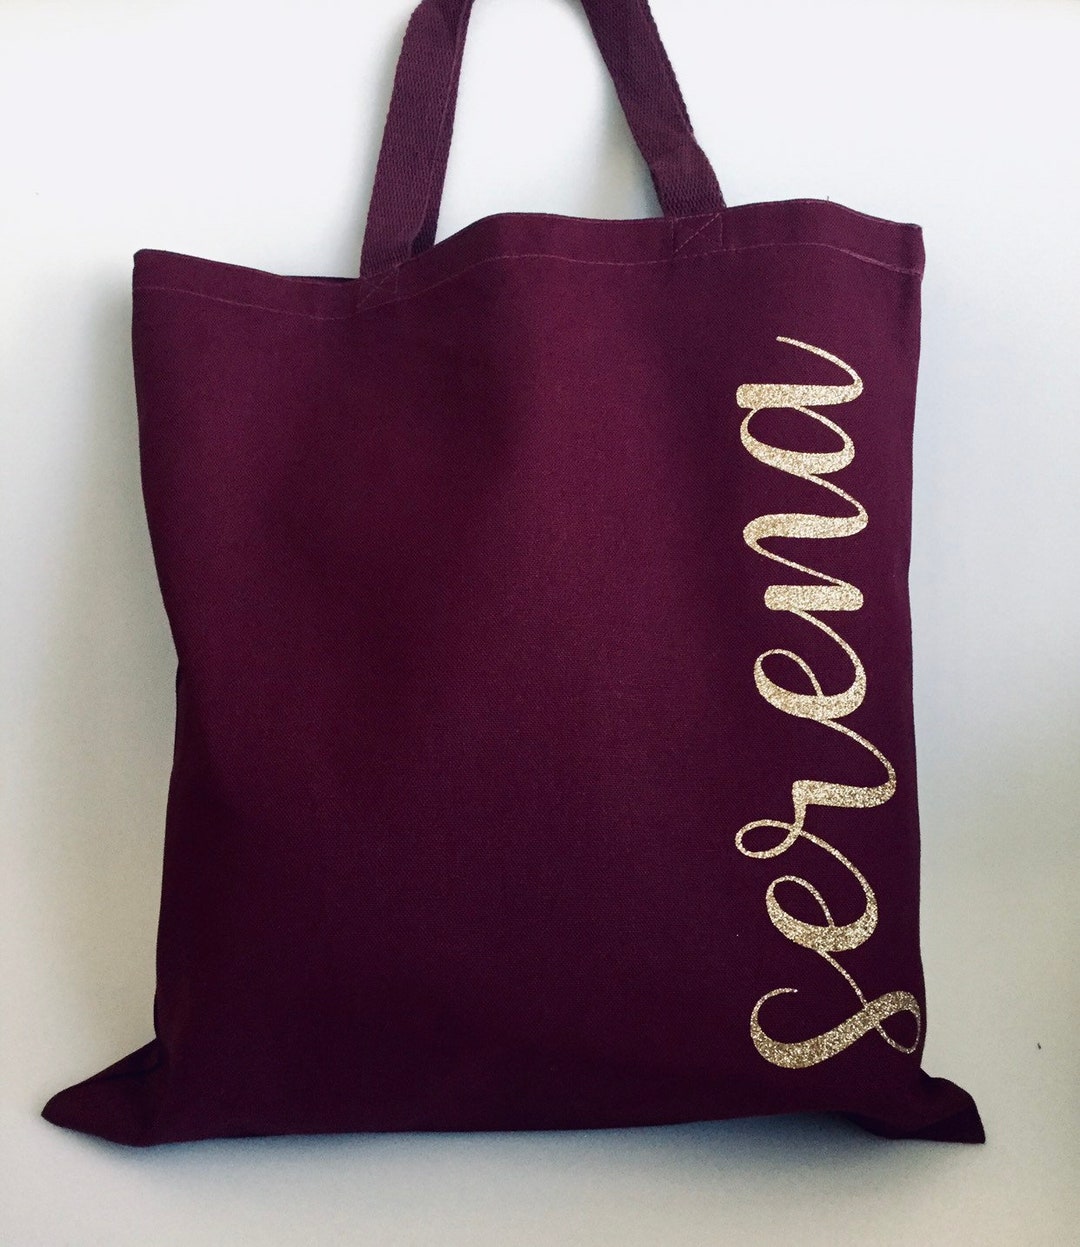 Bridal Party Canvas Tote Personalized with a Stylized Name